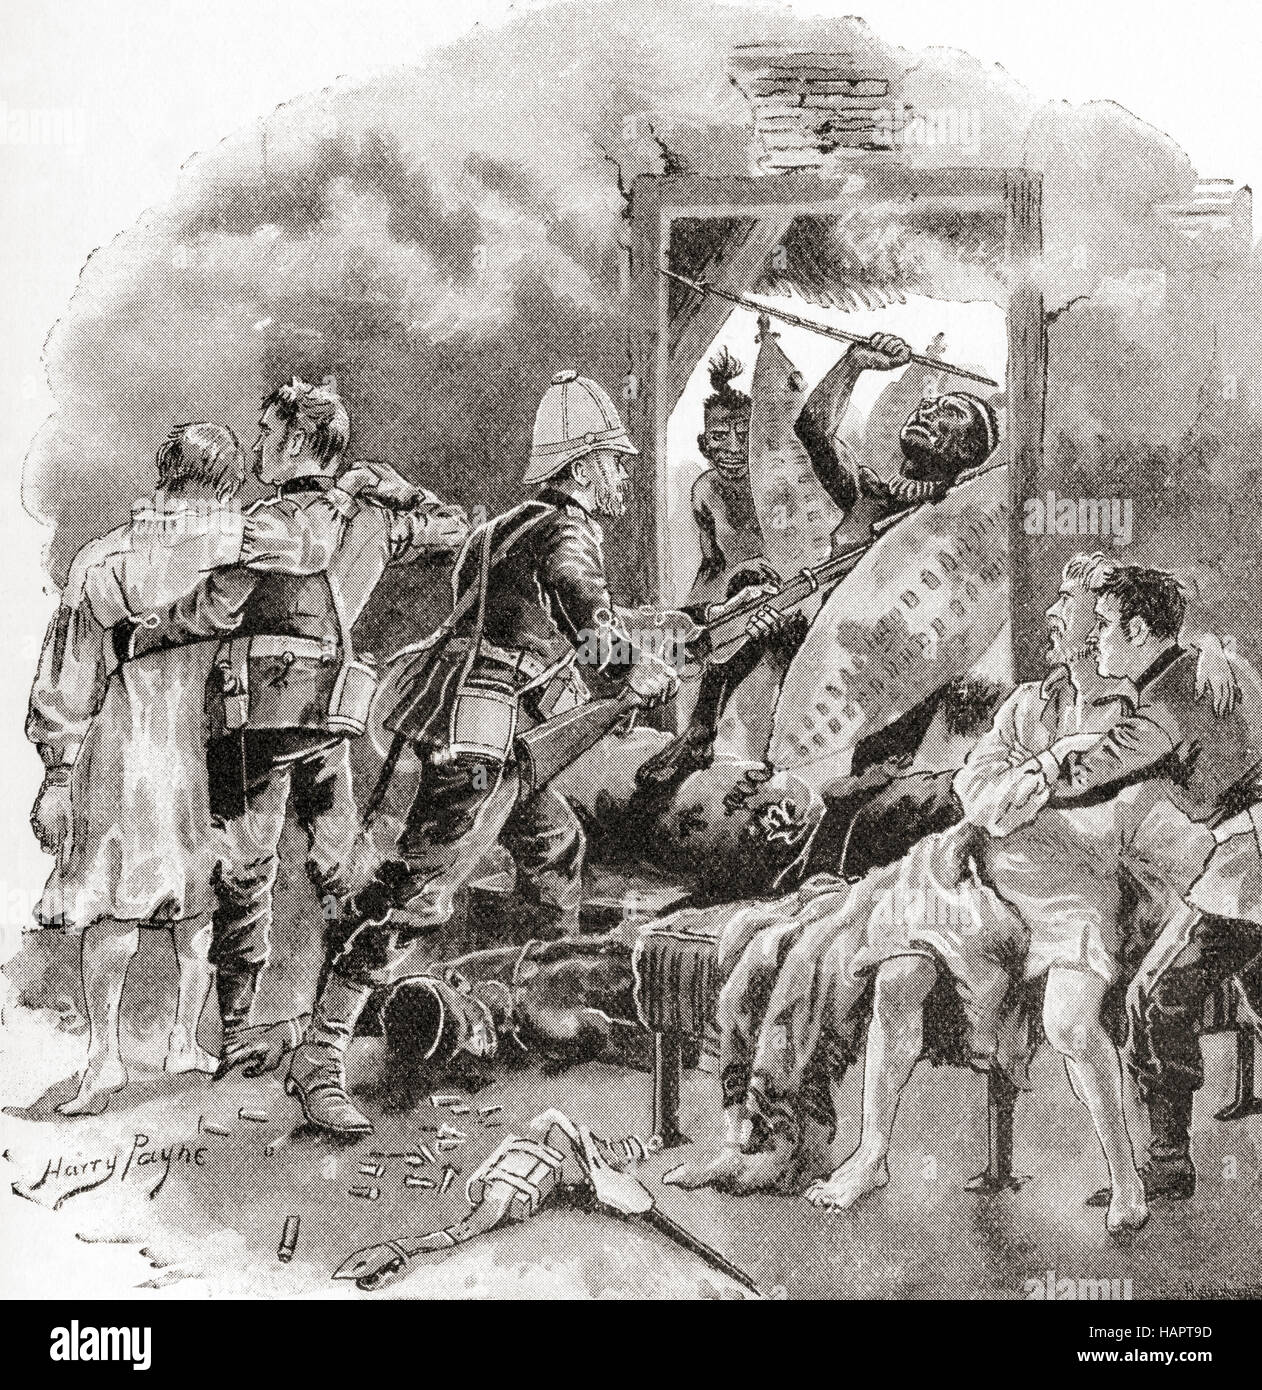 Private William Jones defending one of the wards in the field hospital at the Battle of Rorke's Drift, South Africa in January 1879 during the Anglo-Zulu War. He received the Victoria Cross in recognition of his bravery.  From The Strand Magazine, Vol I January to June, 1891. Stock Photo